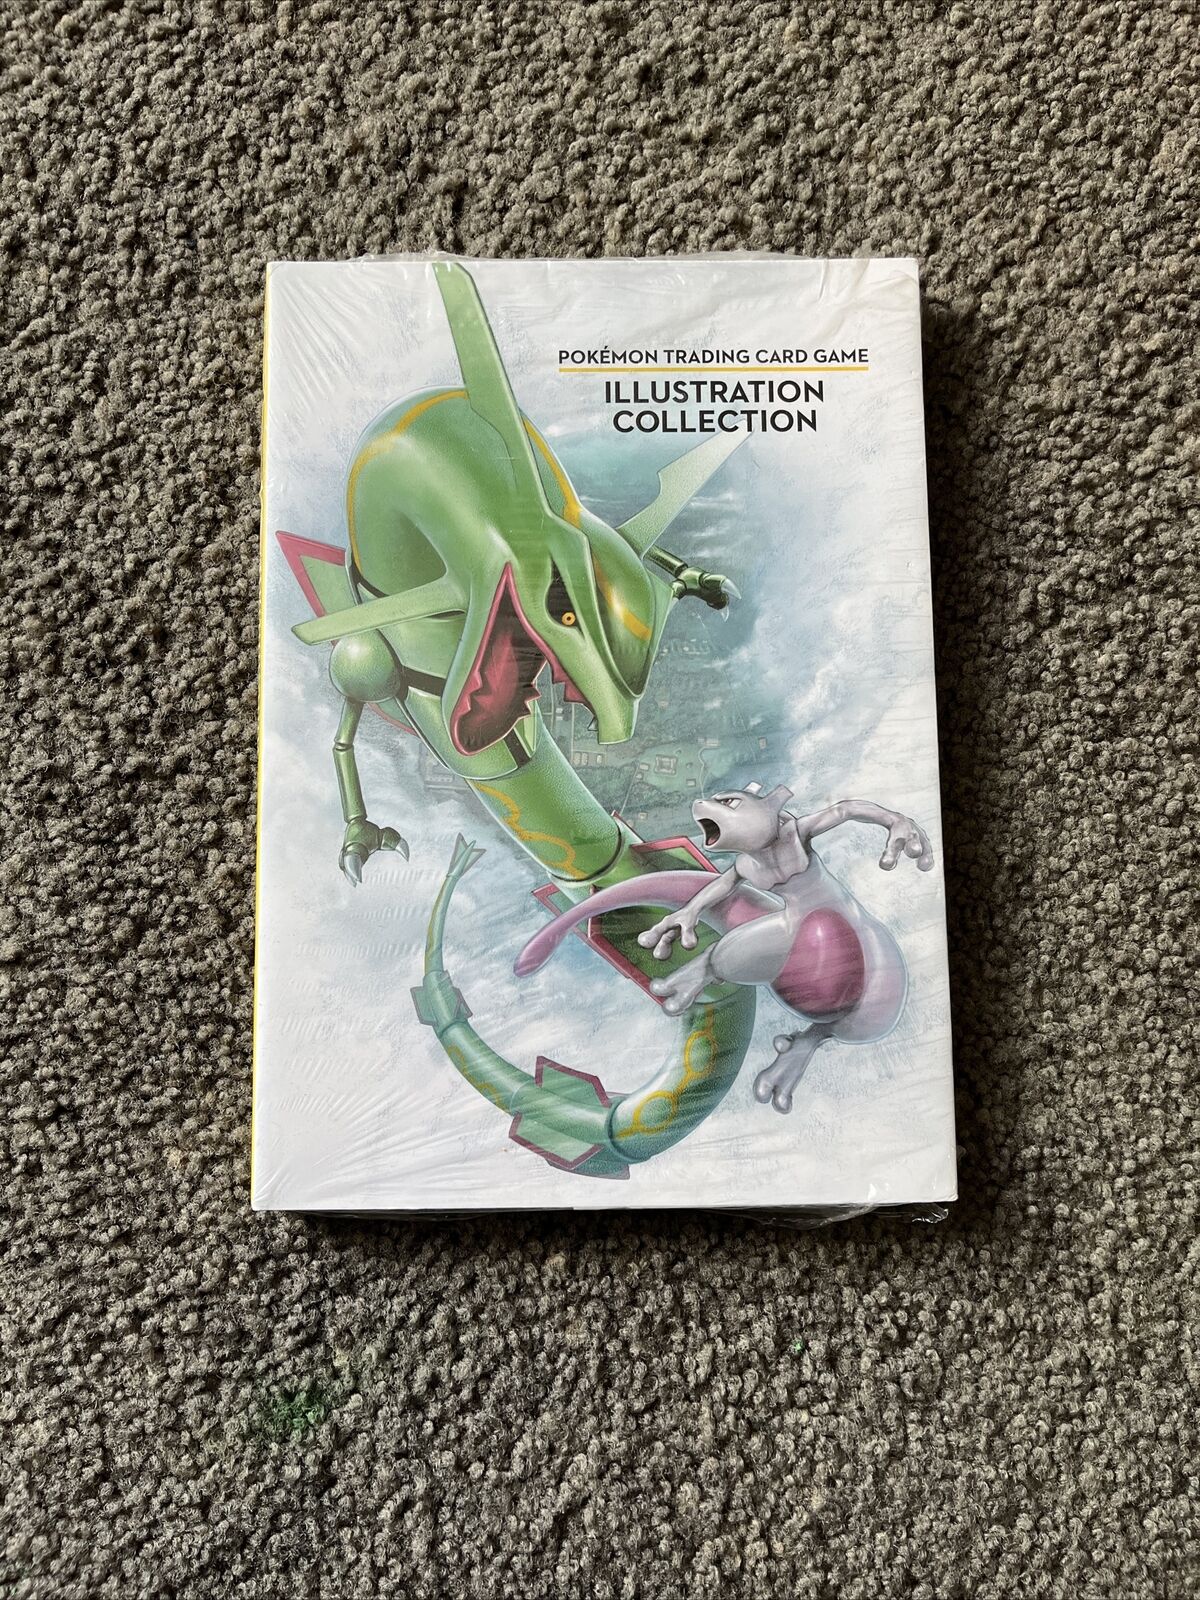 Pokemon Trading Card Game Illustration Collection Art Book 2016 New Sealed